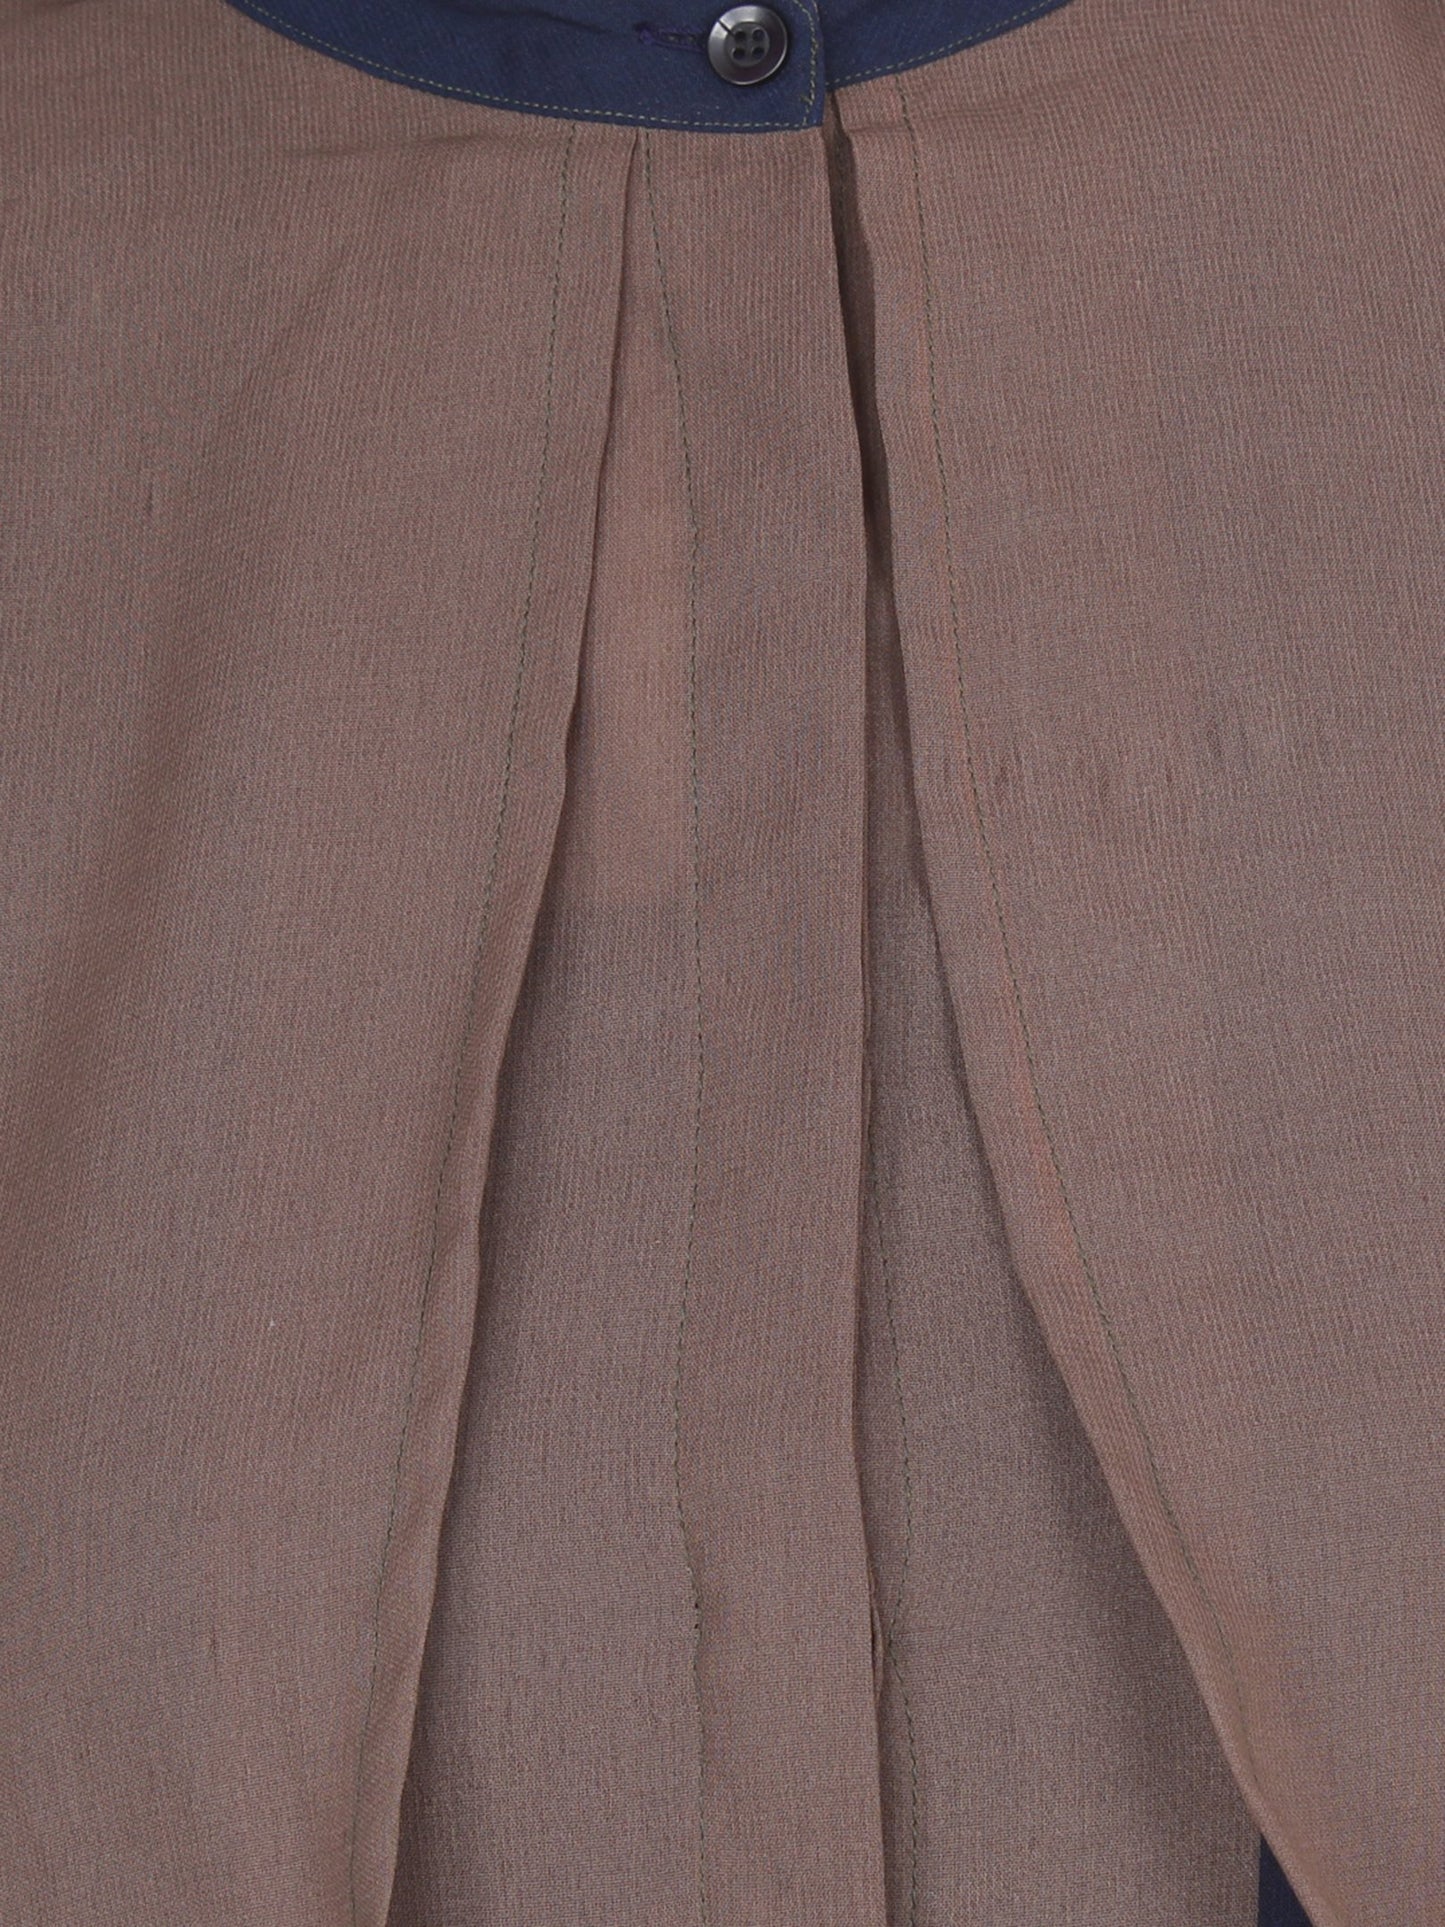 Brown Solid Shirt